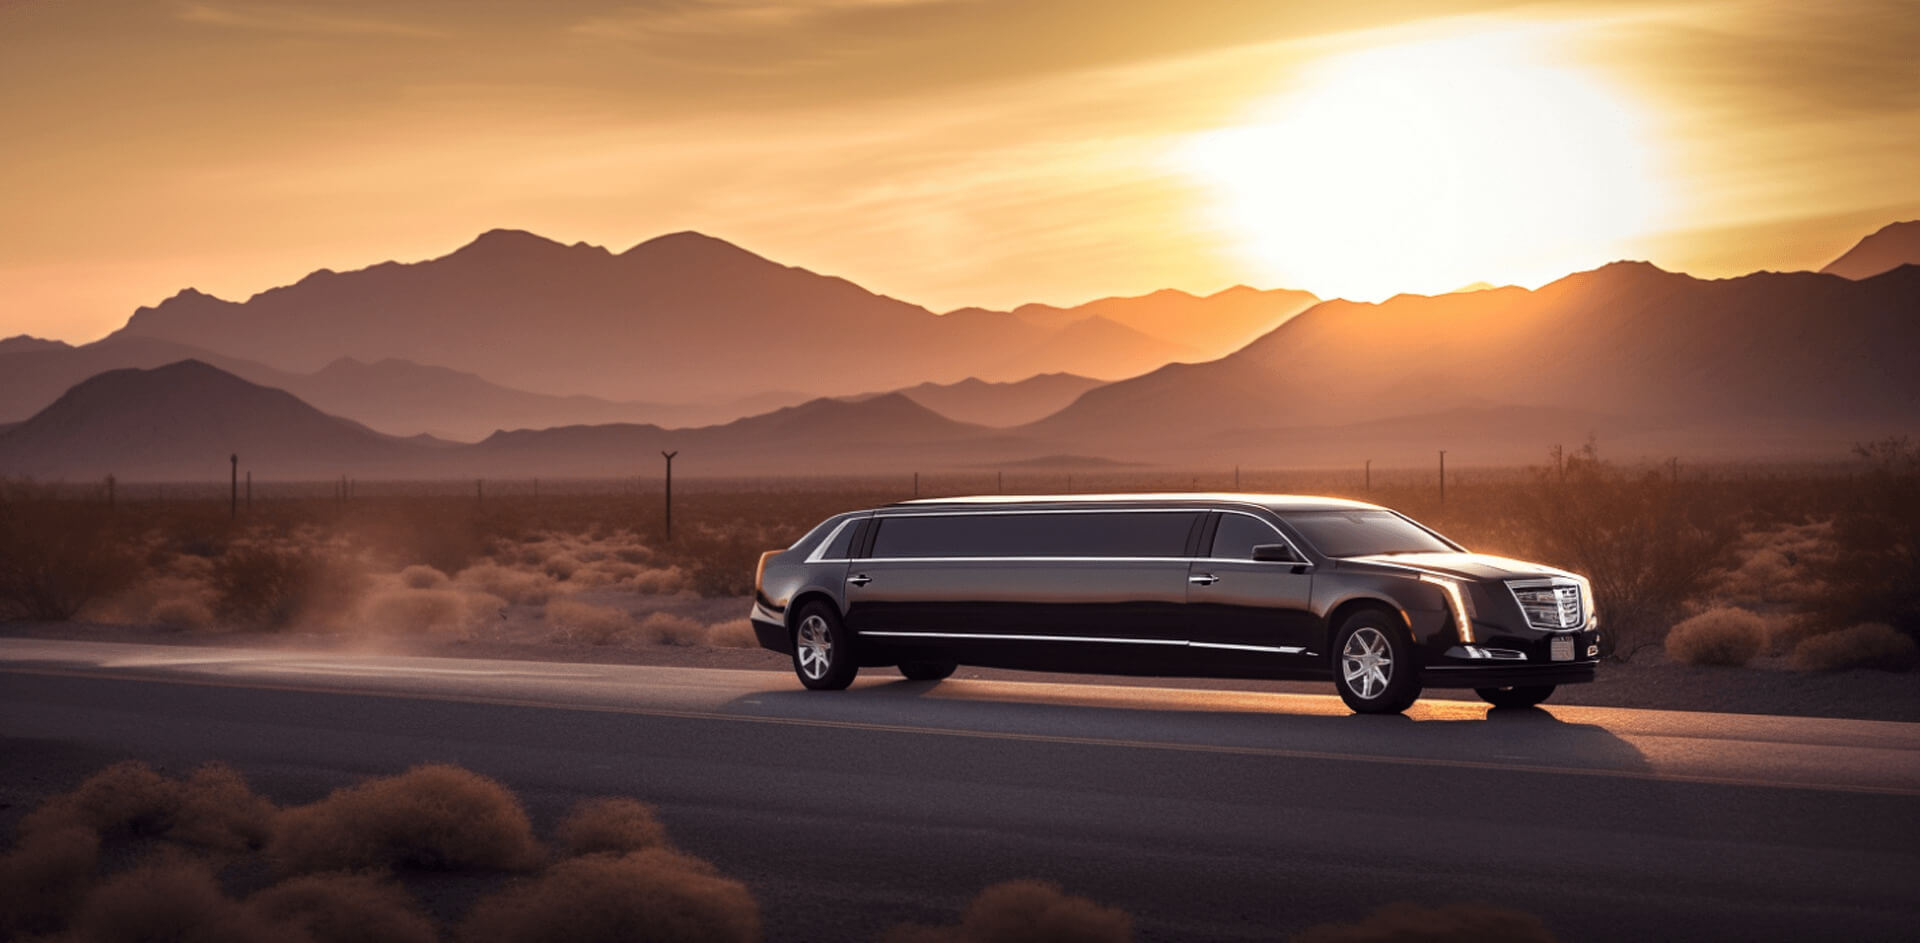 Top-Notch Limo Service in Carefree